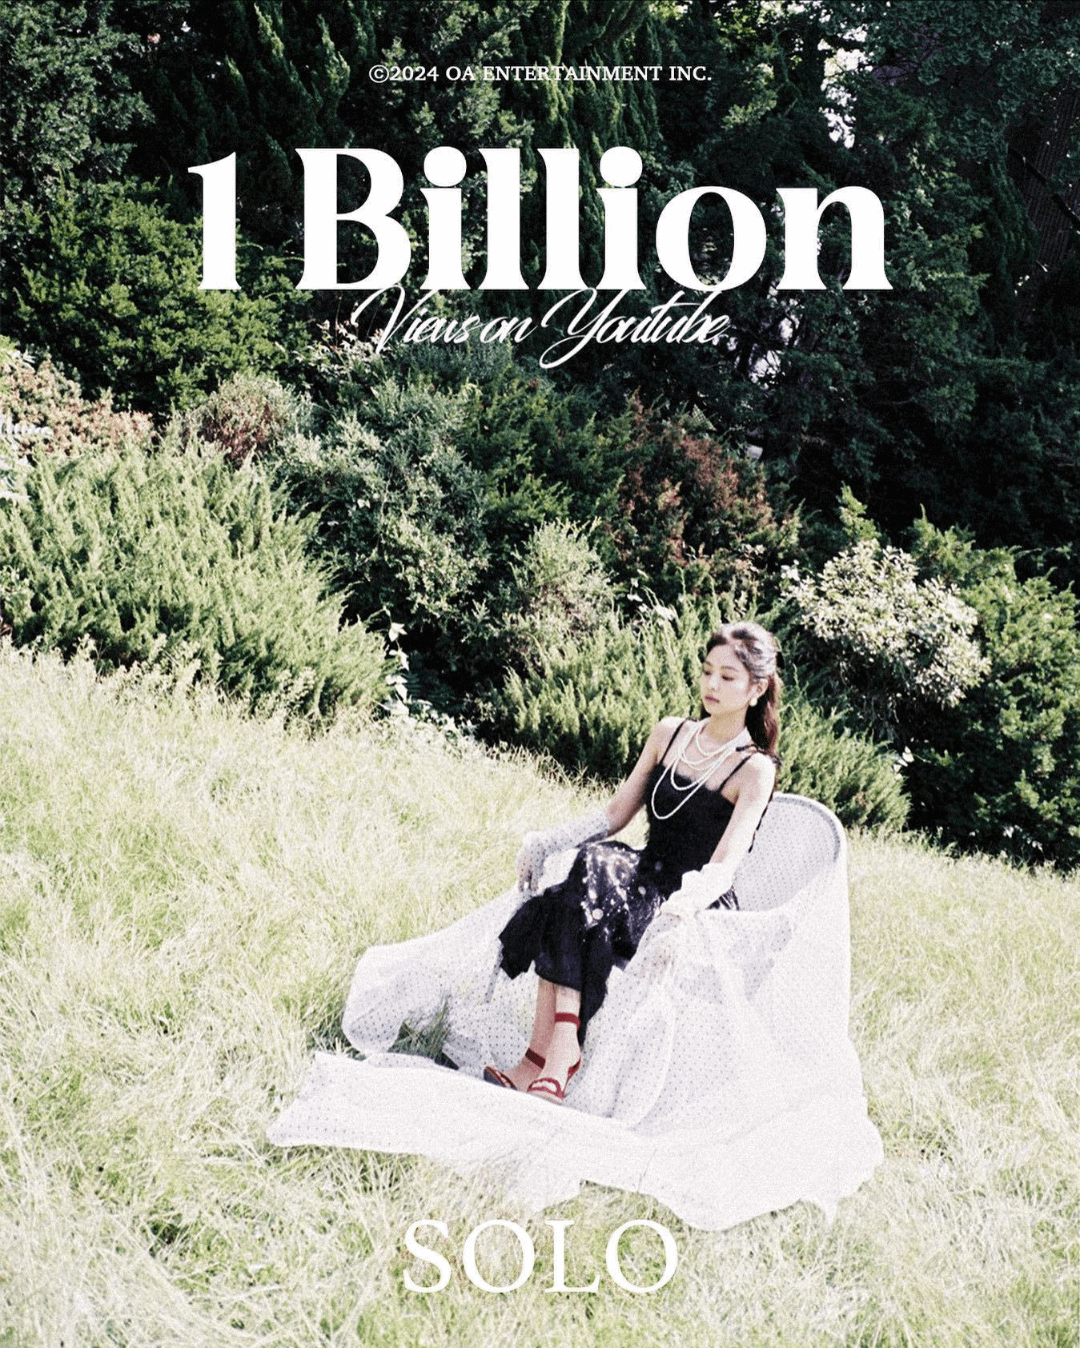 Jennie, the first K-pop girl act to pass 1 BILLION views on YouTube